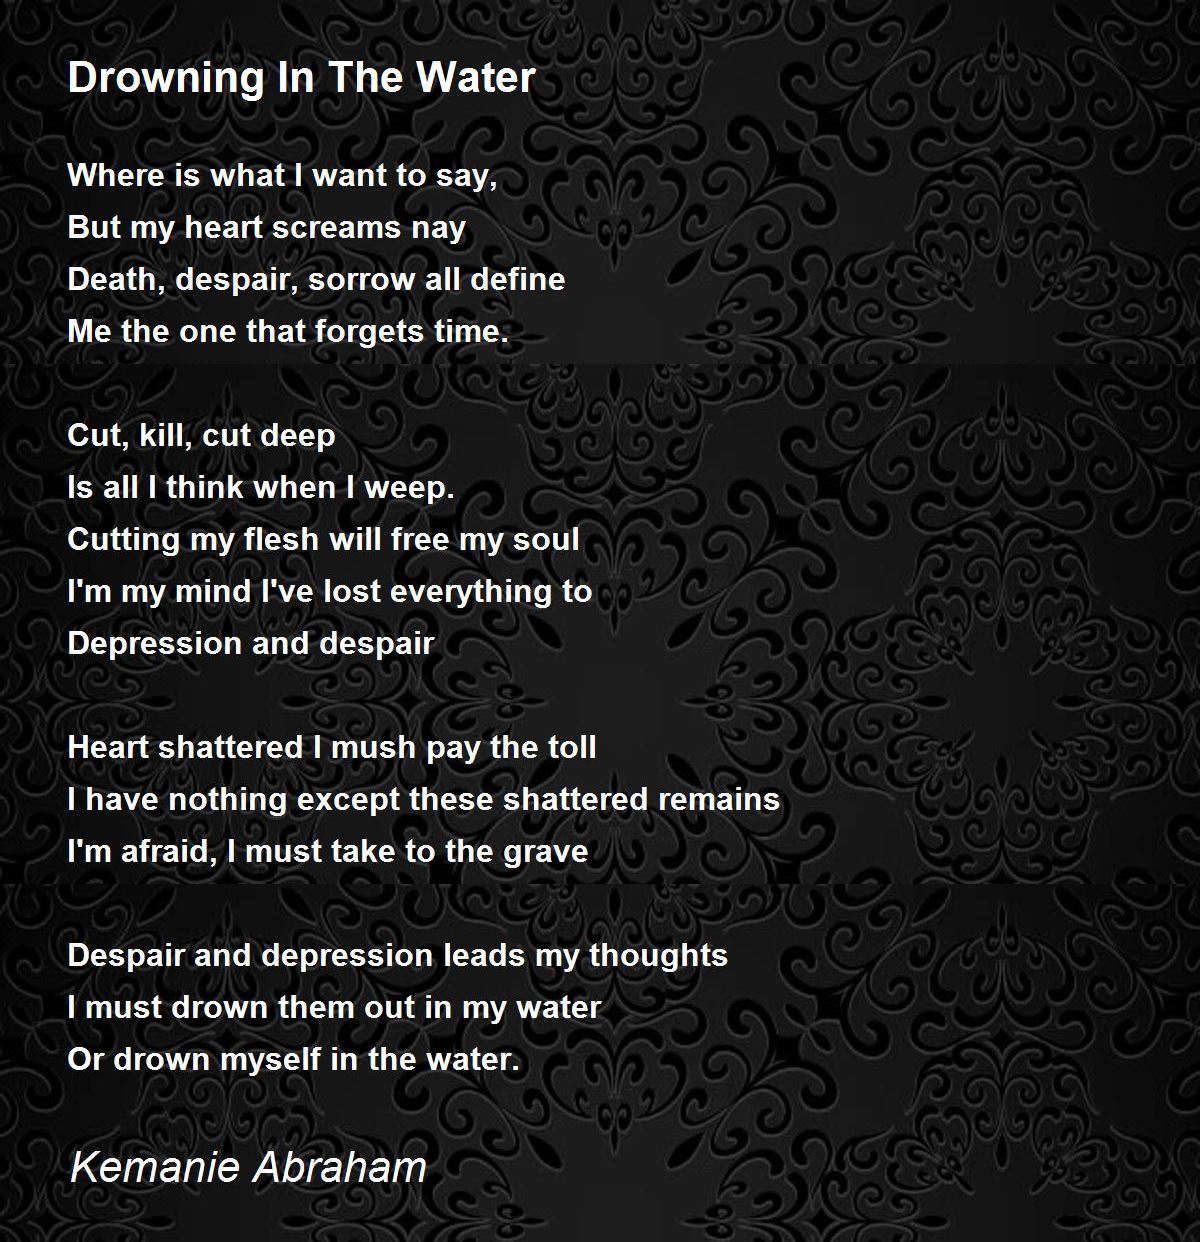 Drowning In The Water Poem by Kemanie Abraham - Poem Hunter